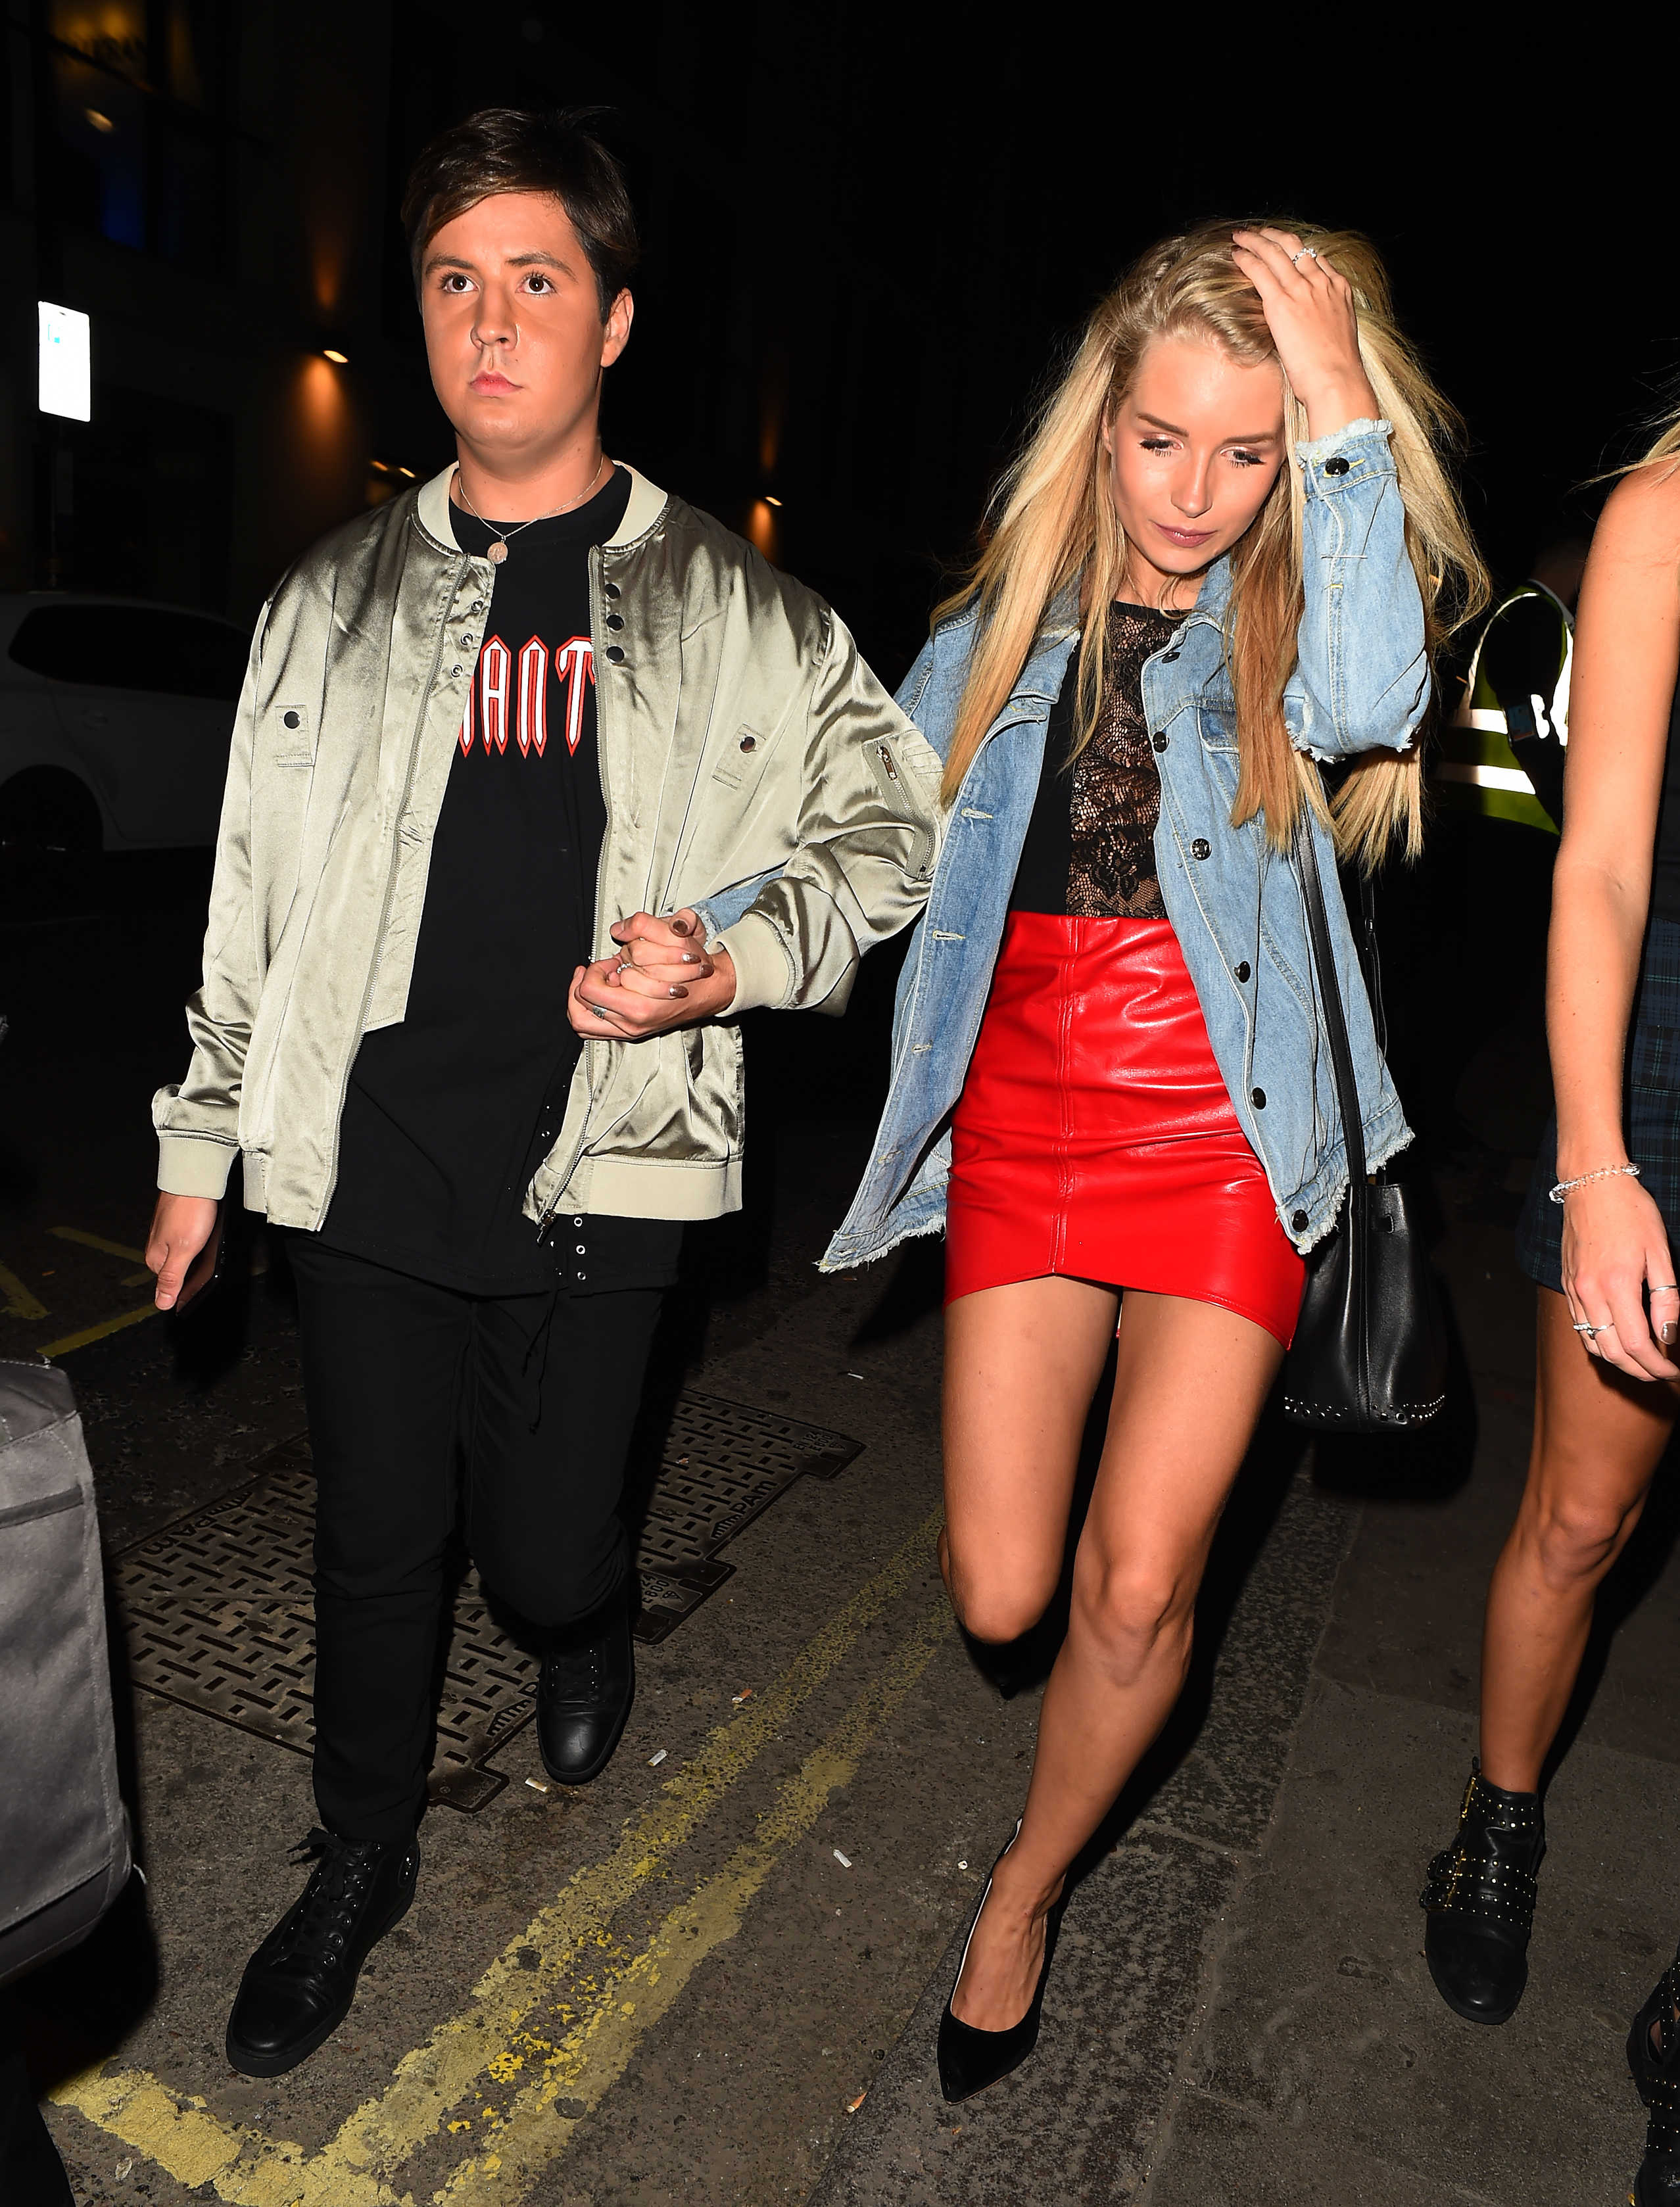 Lottie Moss spotted on a night out in London